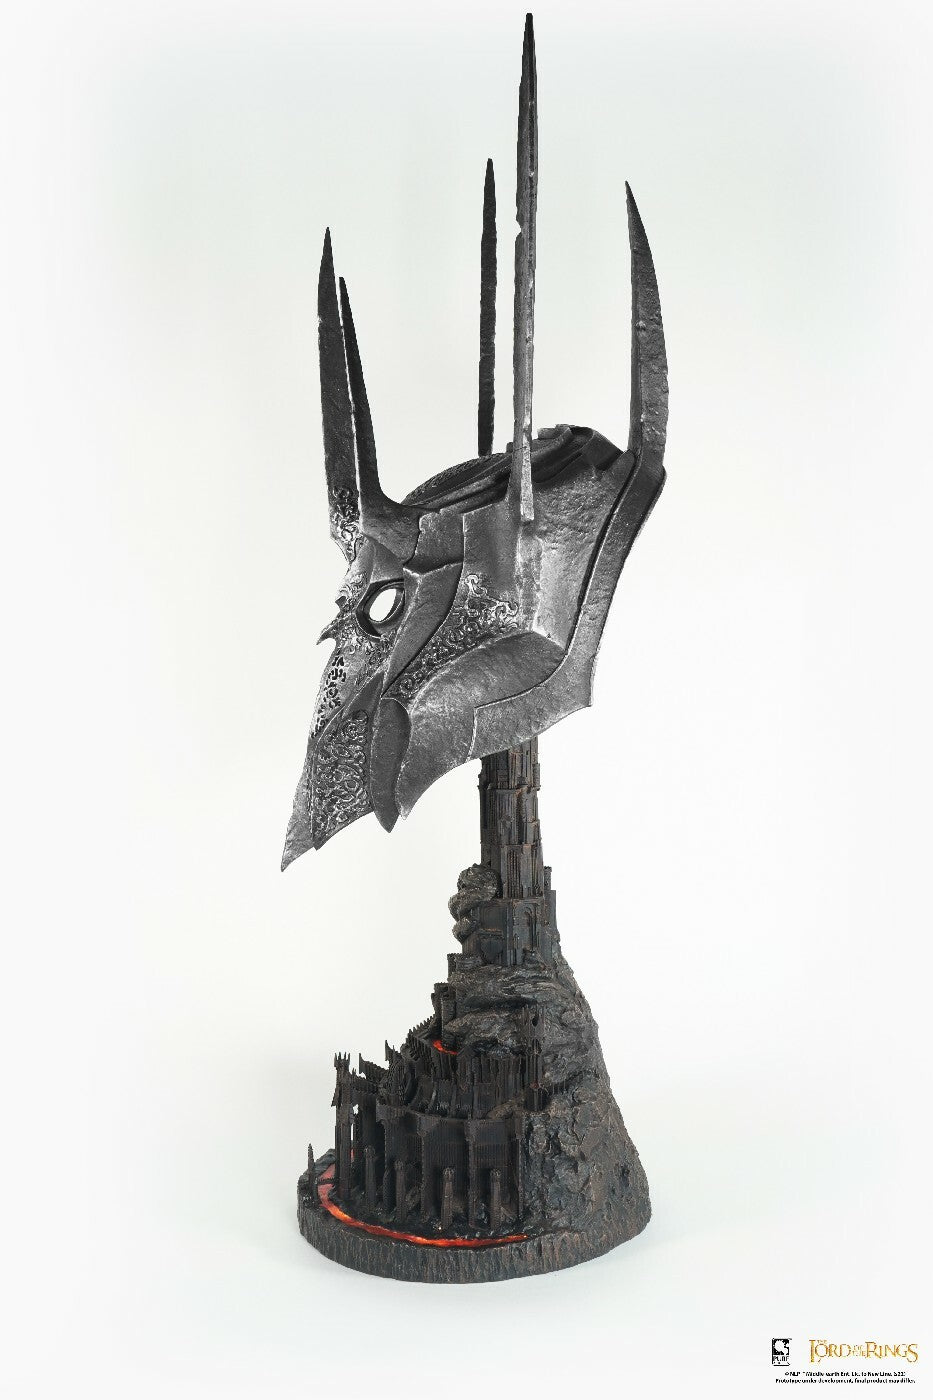  Lord of the Rings: Sauron Art Mask 1:1 Scale Statue  0713929404469